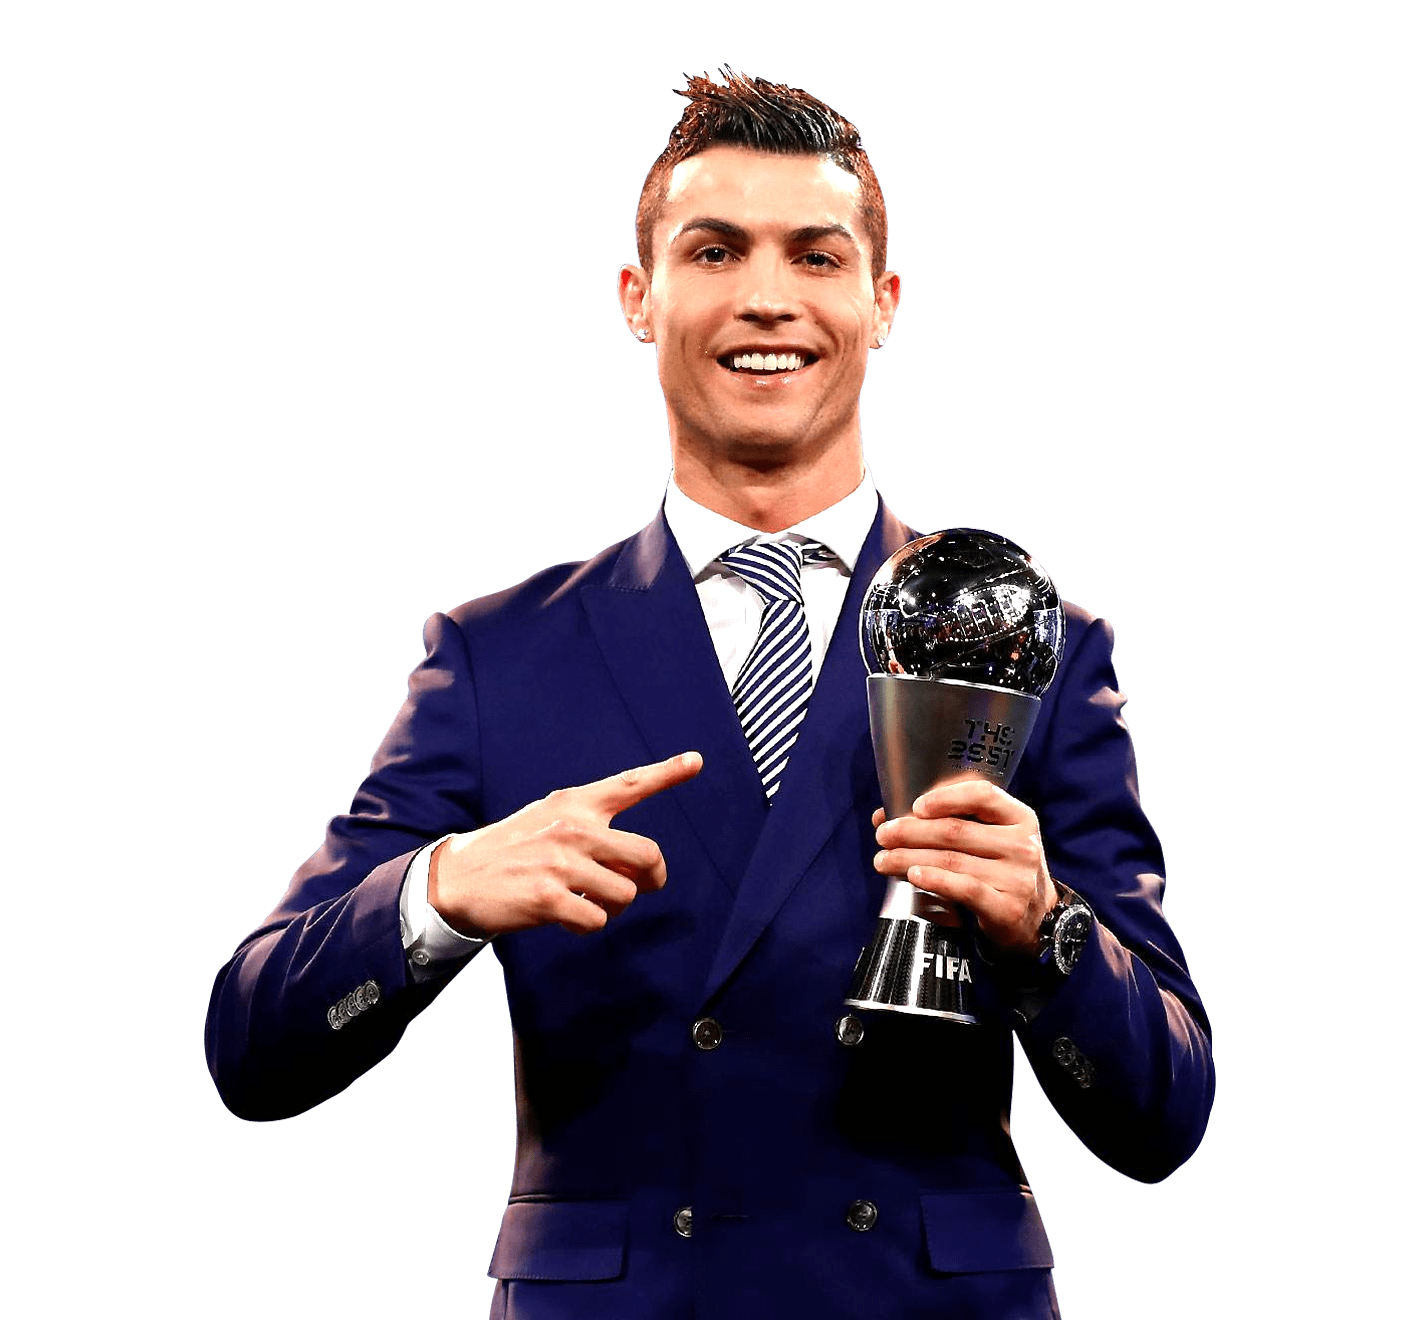 fifa best player 2020, fifa best player of all-time, fifa best player 2021 winner, world best player 2020, fifa best player 2019, fifa best player award listfifa best player 2020, fifa best player 2021 winner, fifa best player of all time, world best player 2020, fifa best player award list, fifa best player 2019, fifa best player award 2021, fifa best player 2021 rankings, fifa best player 2020, fifa best player 2021 winner, fifa best player of all time, world best player 2020, fifa best player award list, fifa best player 2019, fifa best player award 2021, fifa best player 2021 rankings, cristiano ronaldo png, ronaldo png download, cristiano ronaldo 2020 png, ronaldo png manchester united, ronaldo png 2021, cristiano ronaldo png portugal, remove bg, free background remover, background remover, free crop png, cut png background, photo cutter,